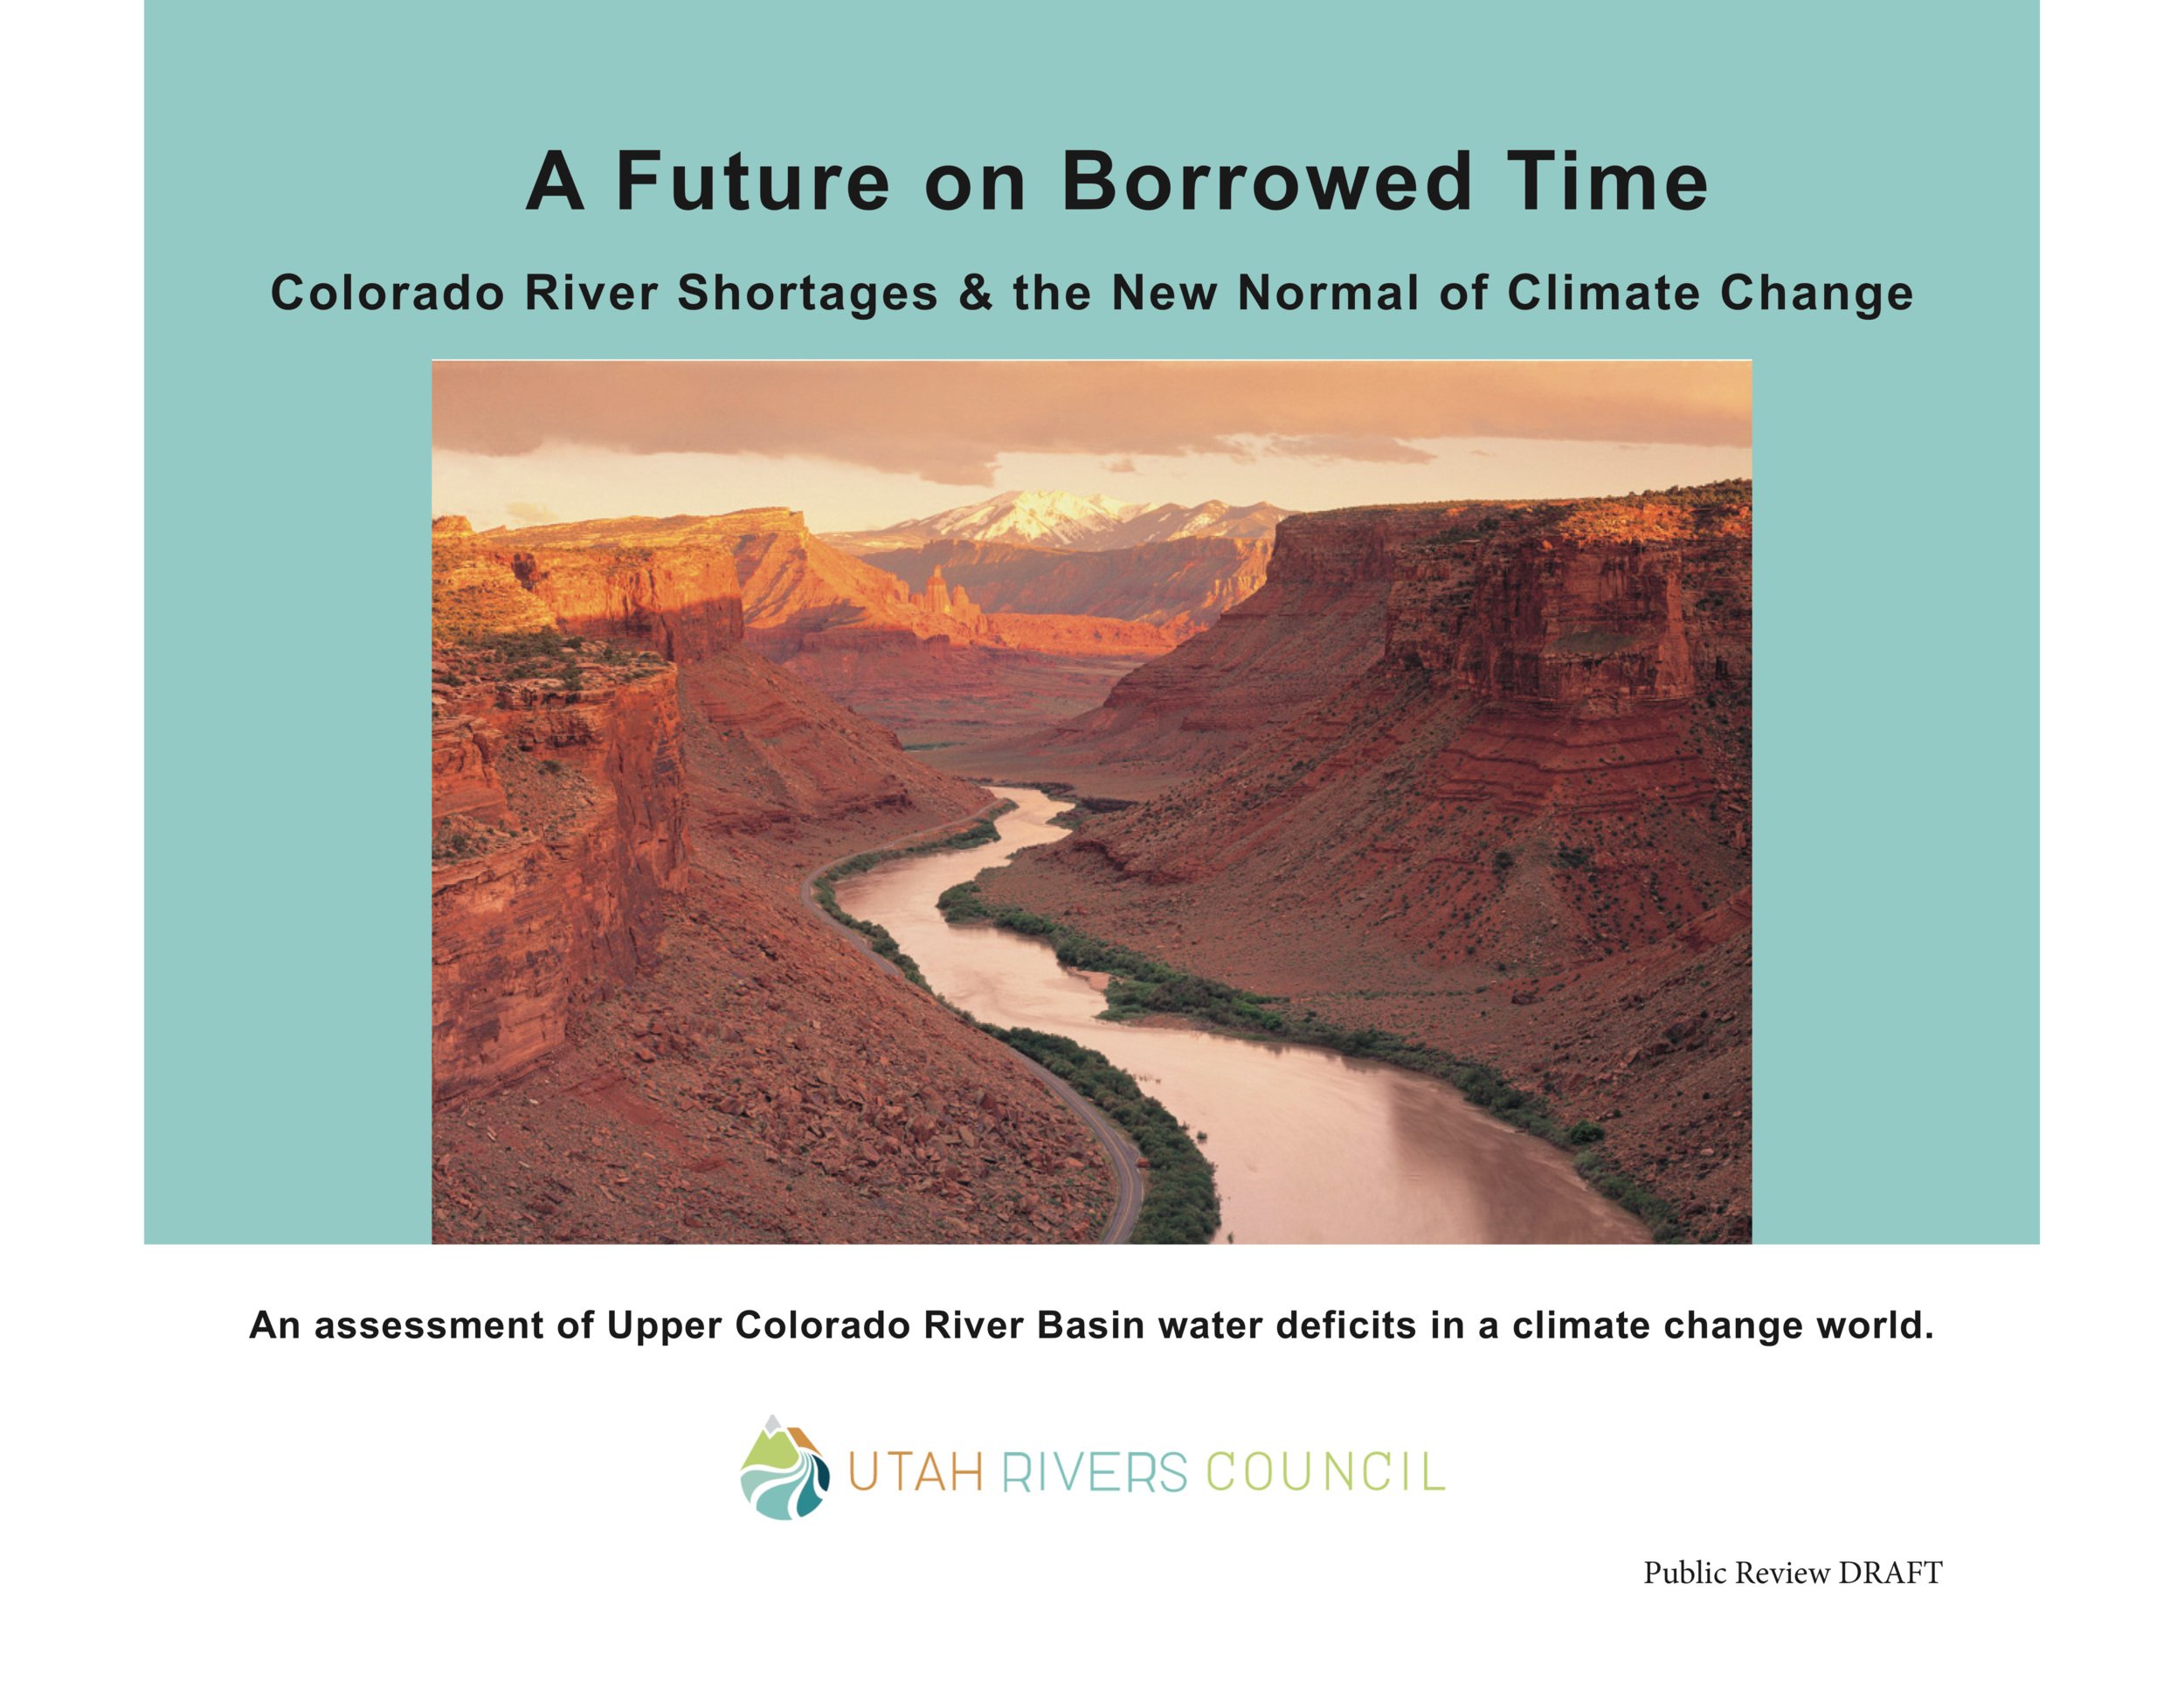 A Future on Borrowed Time: Colorado River Shortages & the New Normal of Climate Change